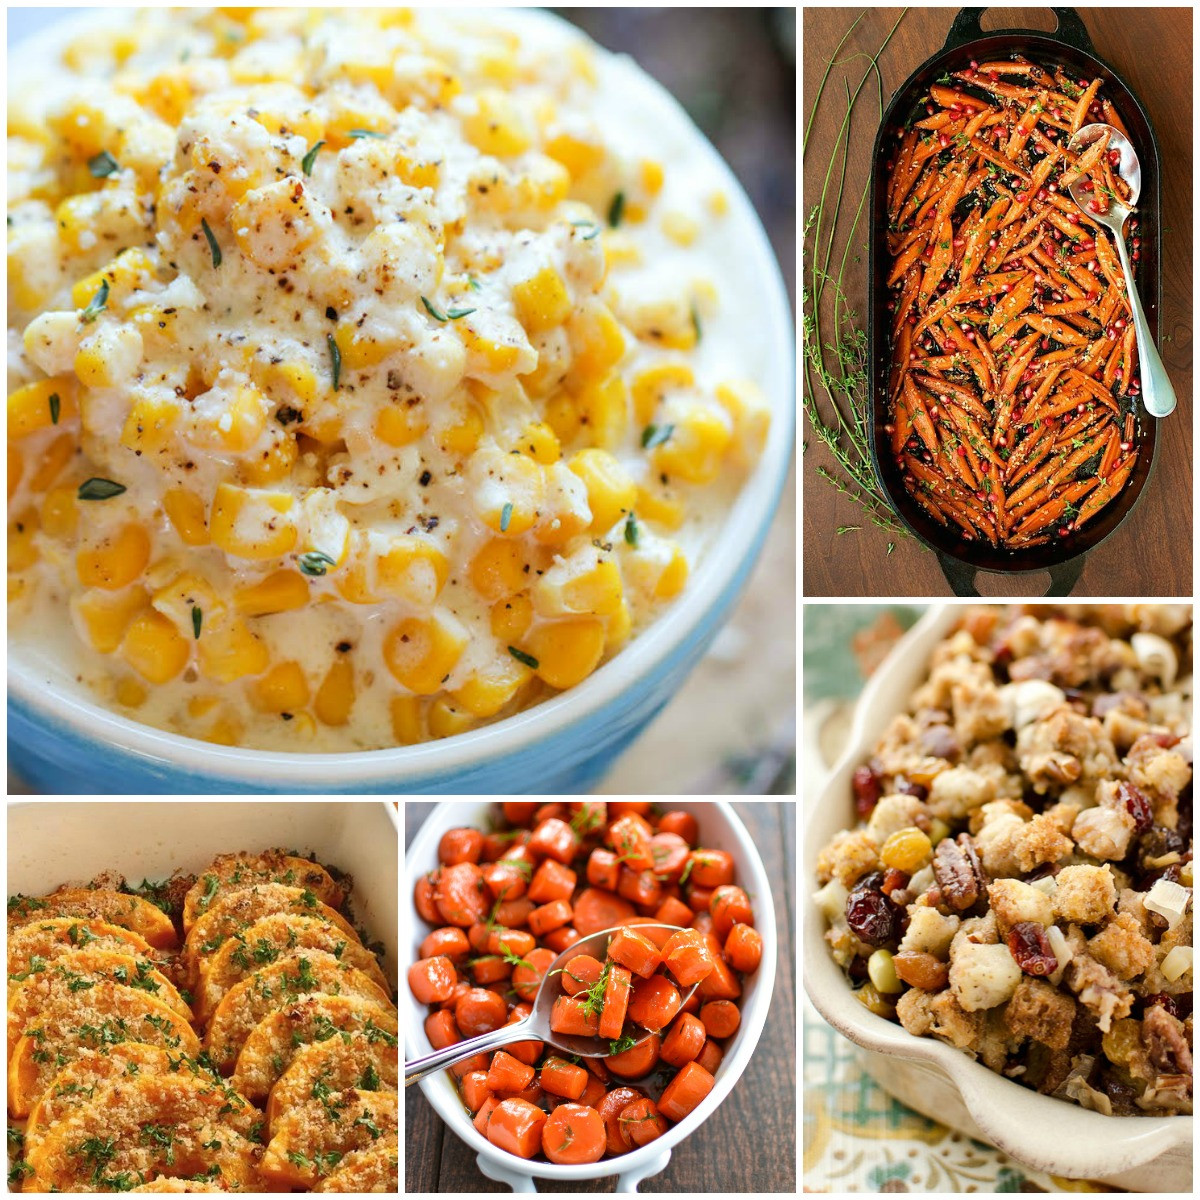 Popular Thanksgiving Side Dishes
 25 Most Pinned Side Dish Recipes for Thanksgiving and